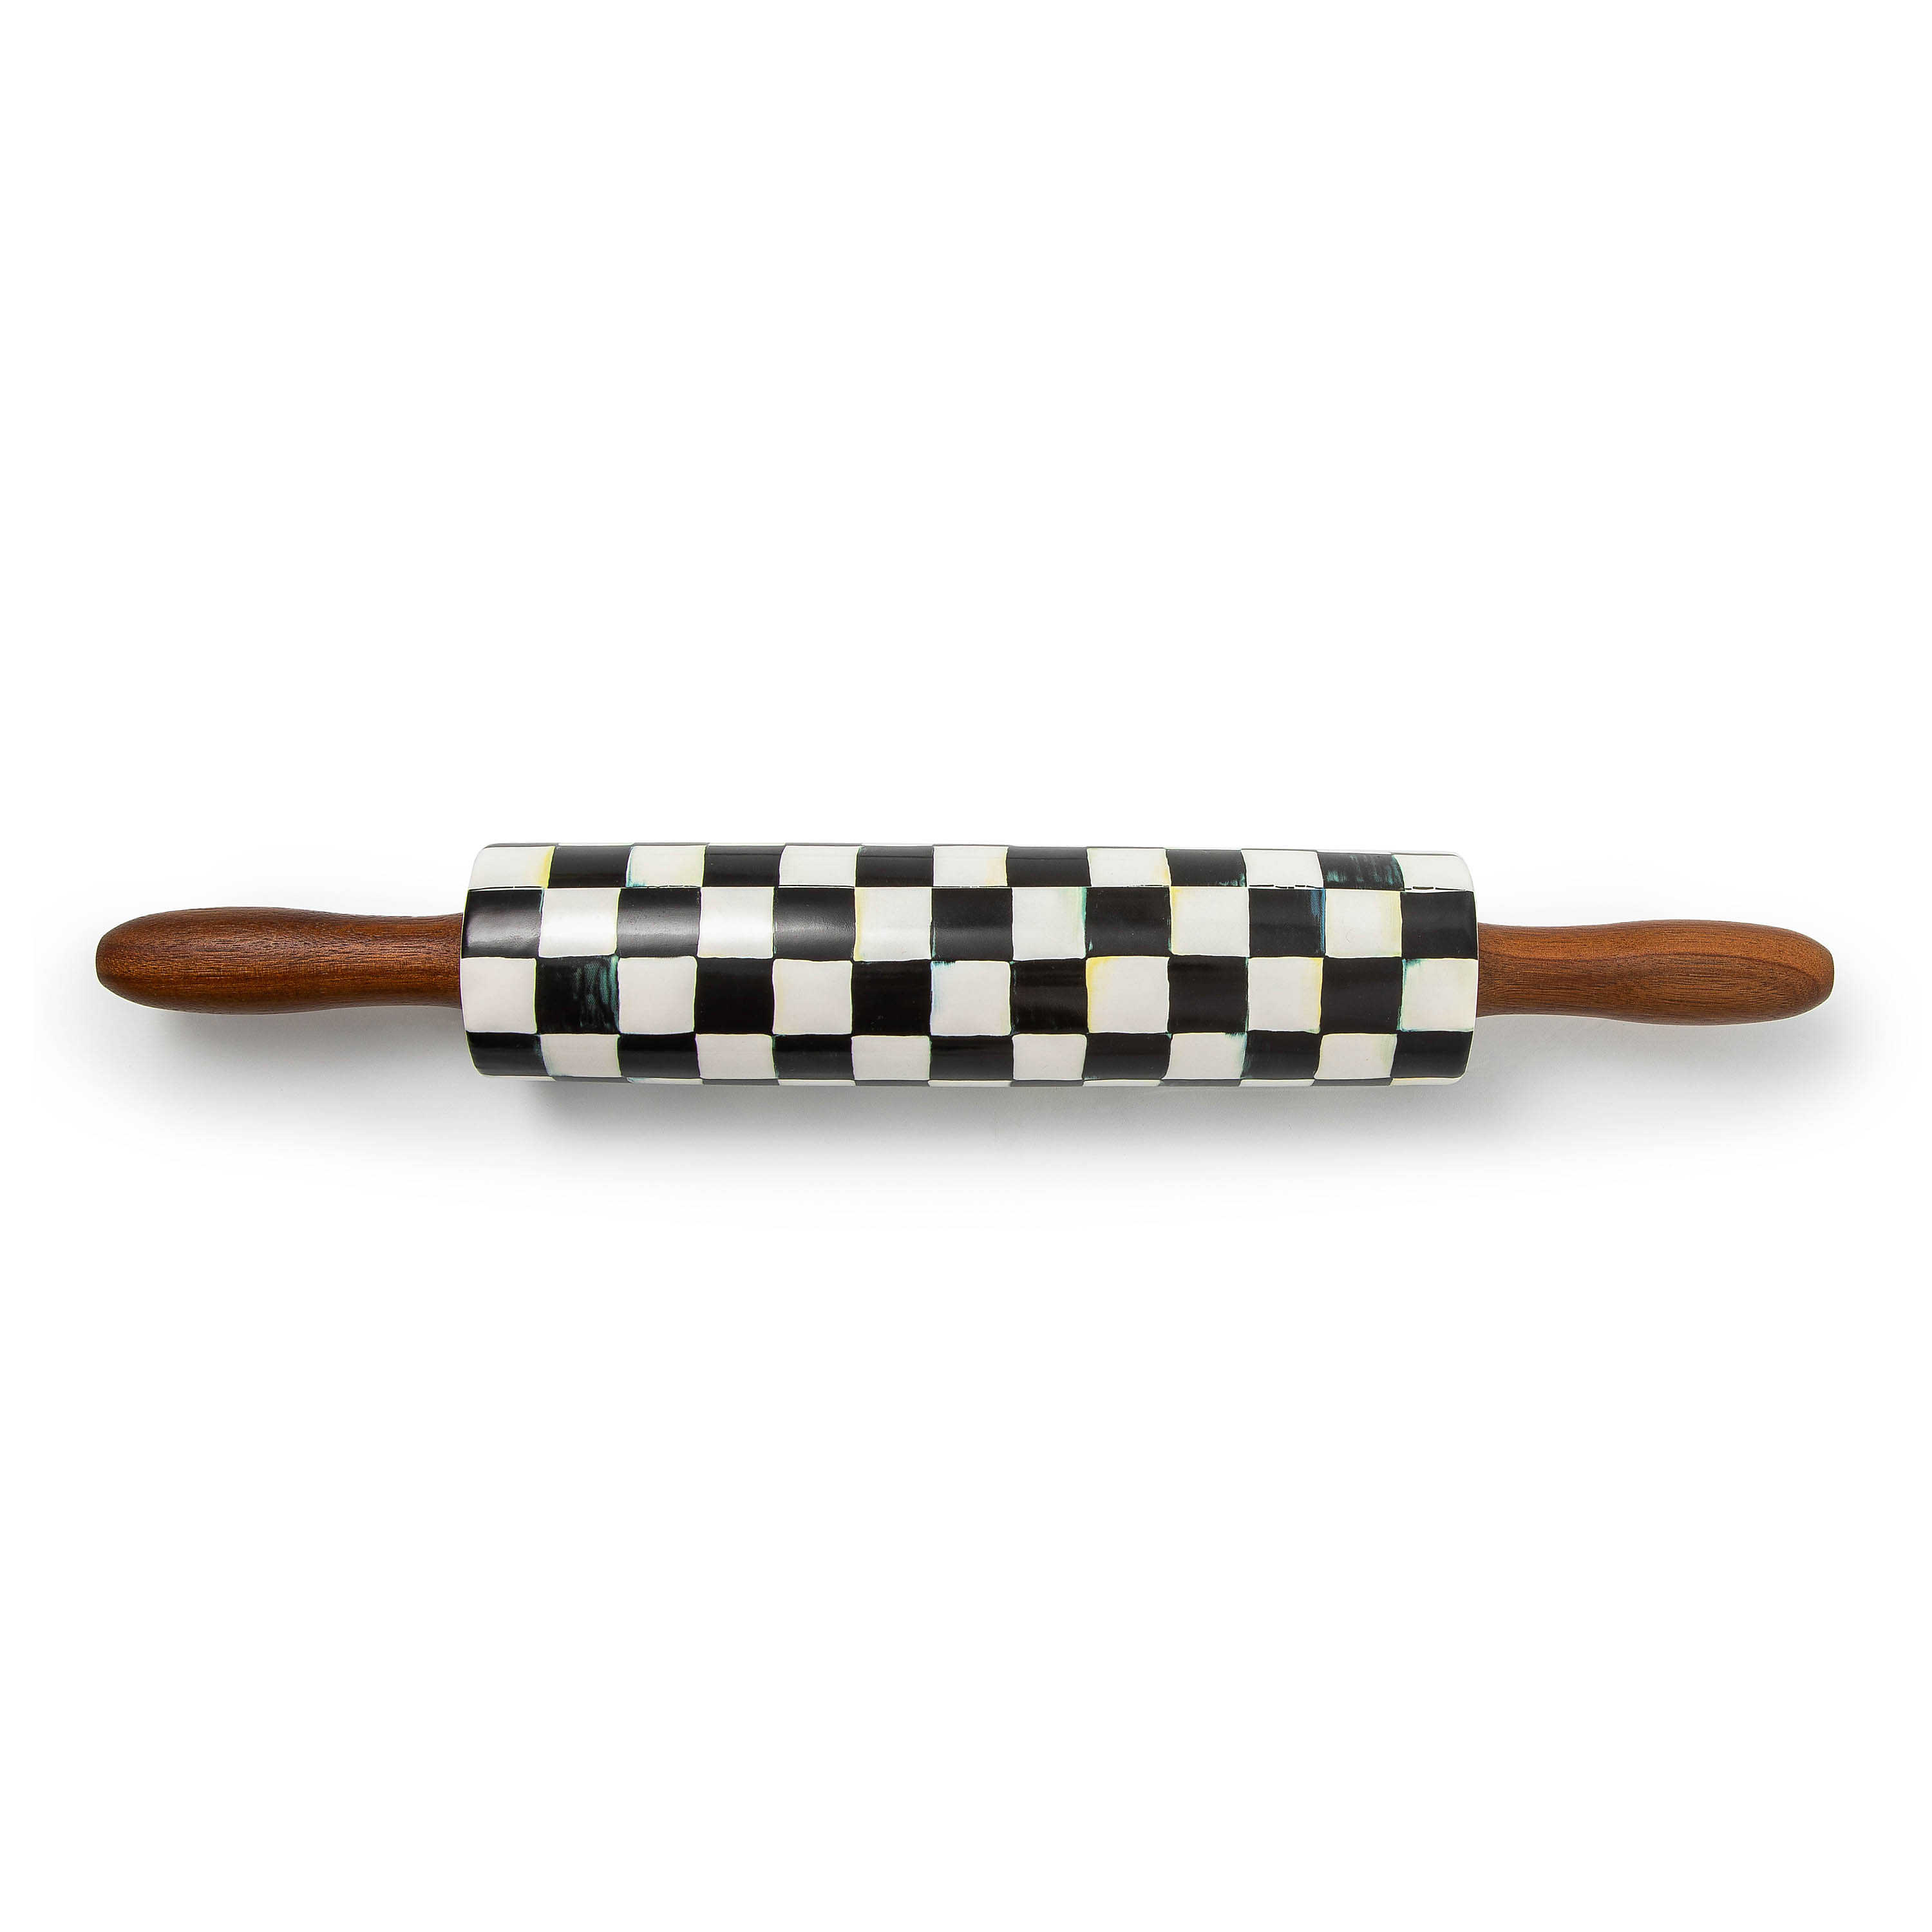 Courtly Check Rolling Pin mackenzie-childs Panama 0